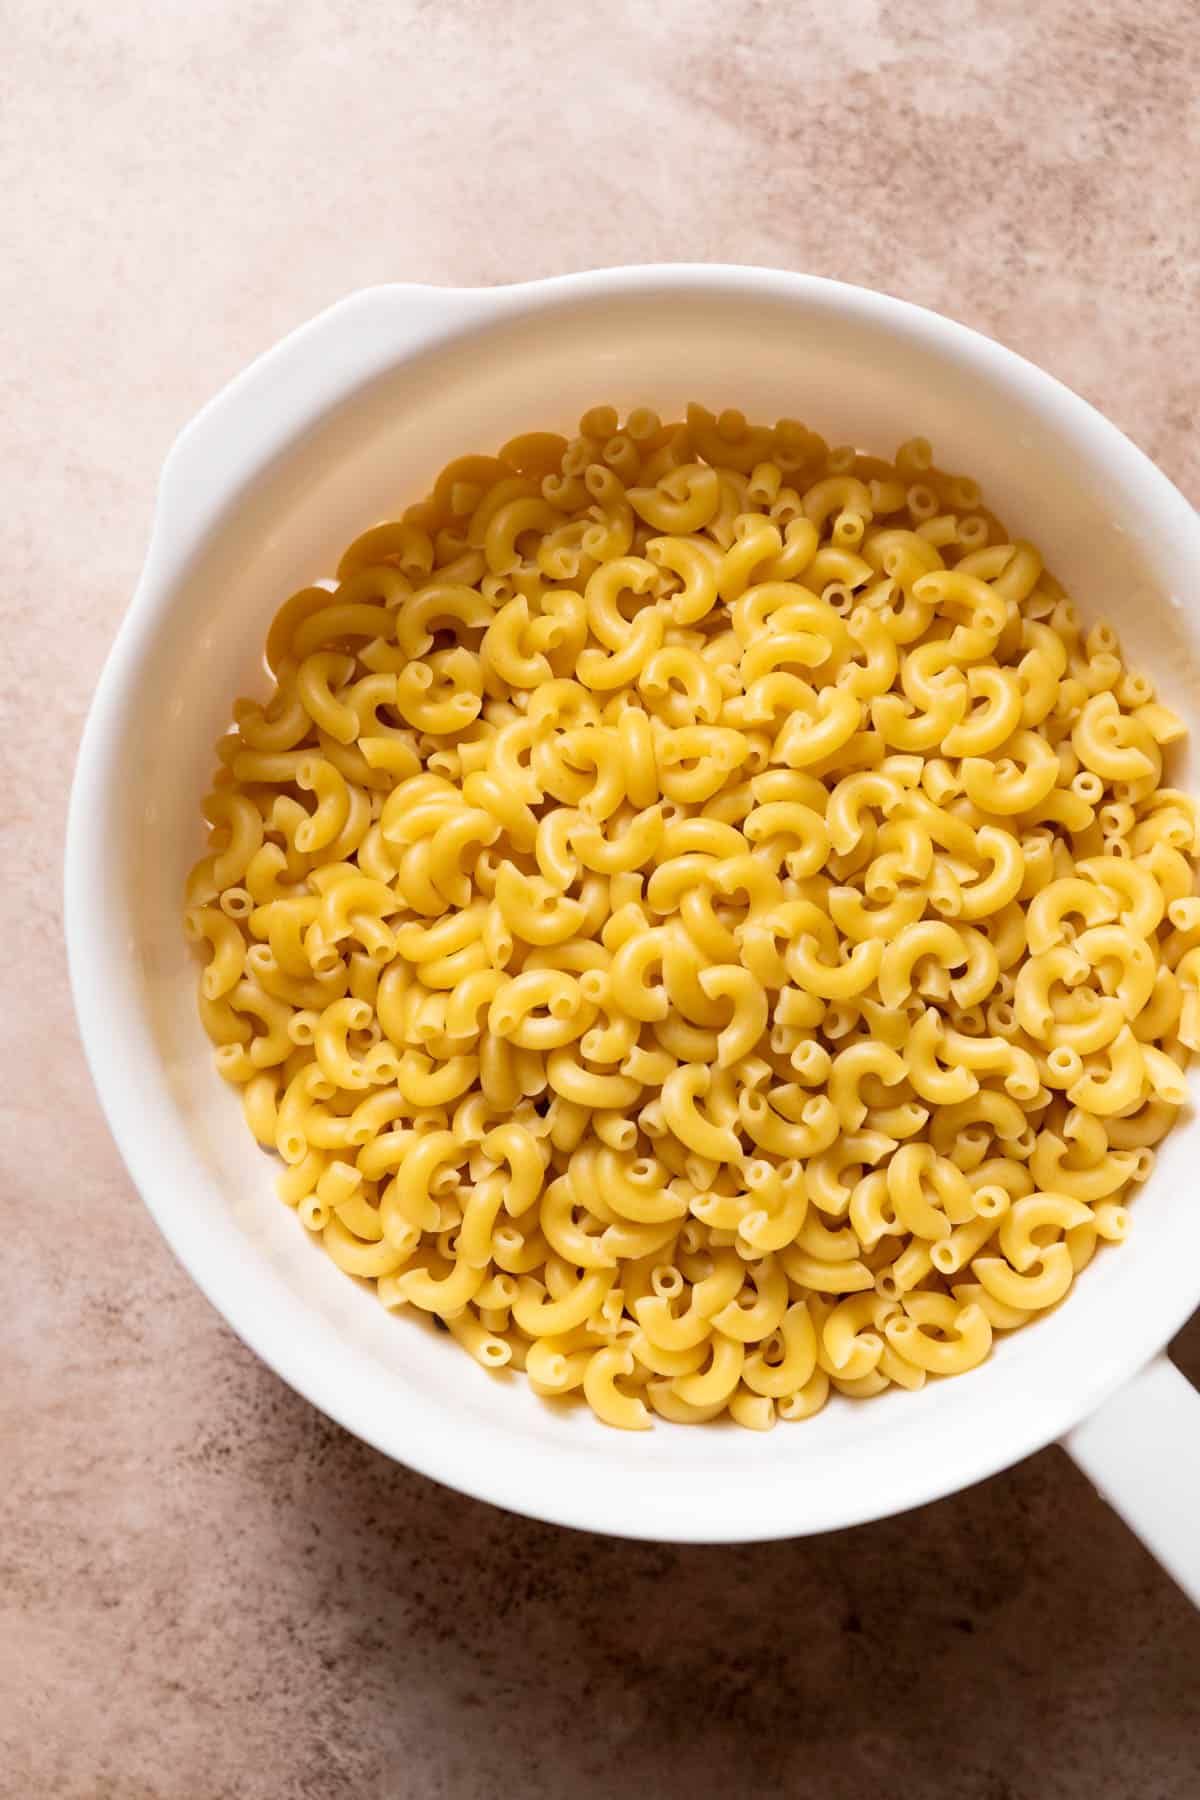 a colander full of cooked elbow macaroni noodles.